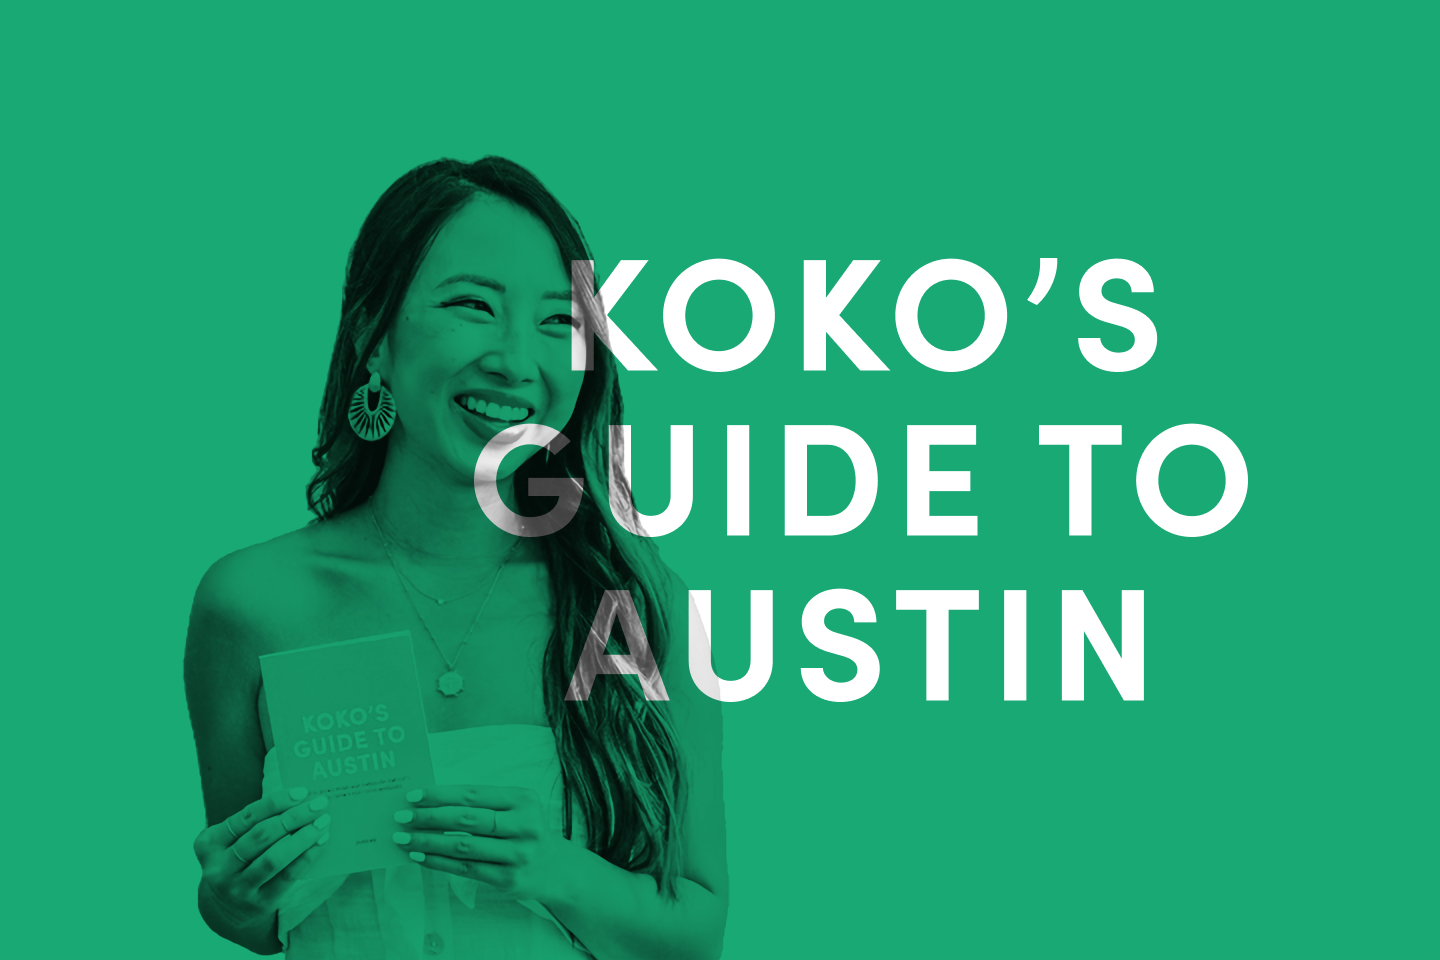 How Jane Ko wrote and published her own guide to Austin